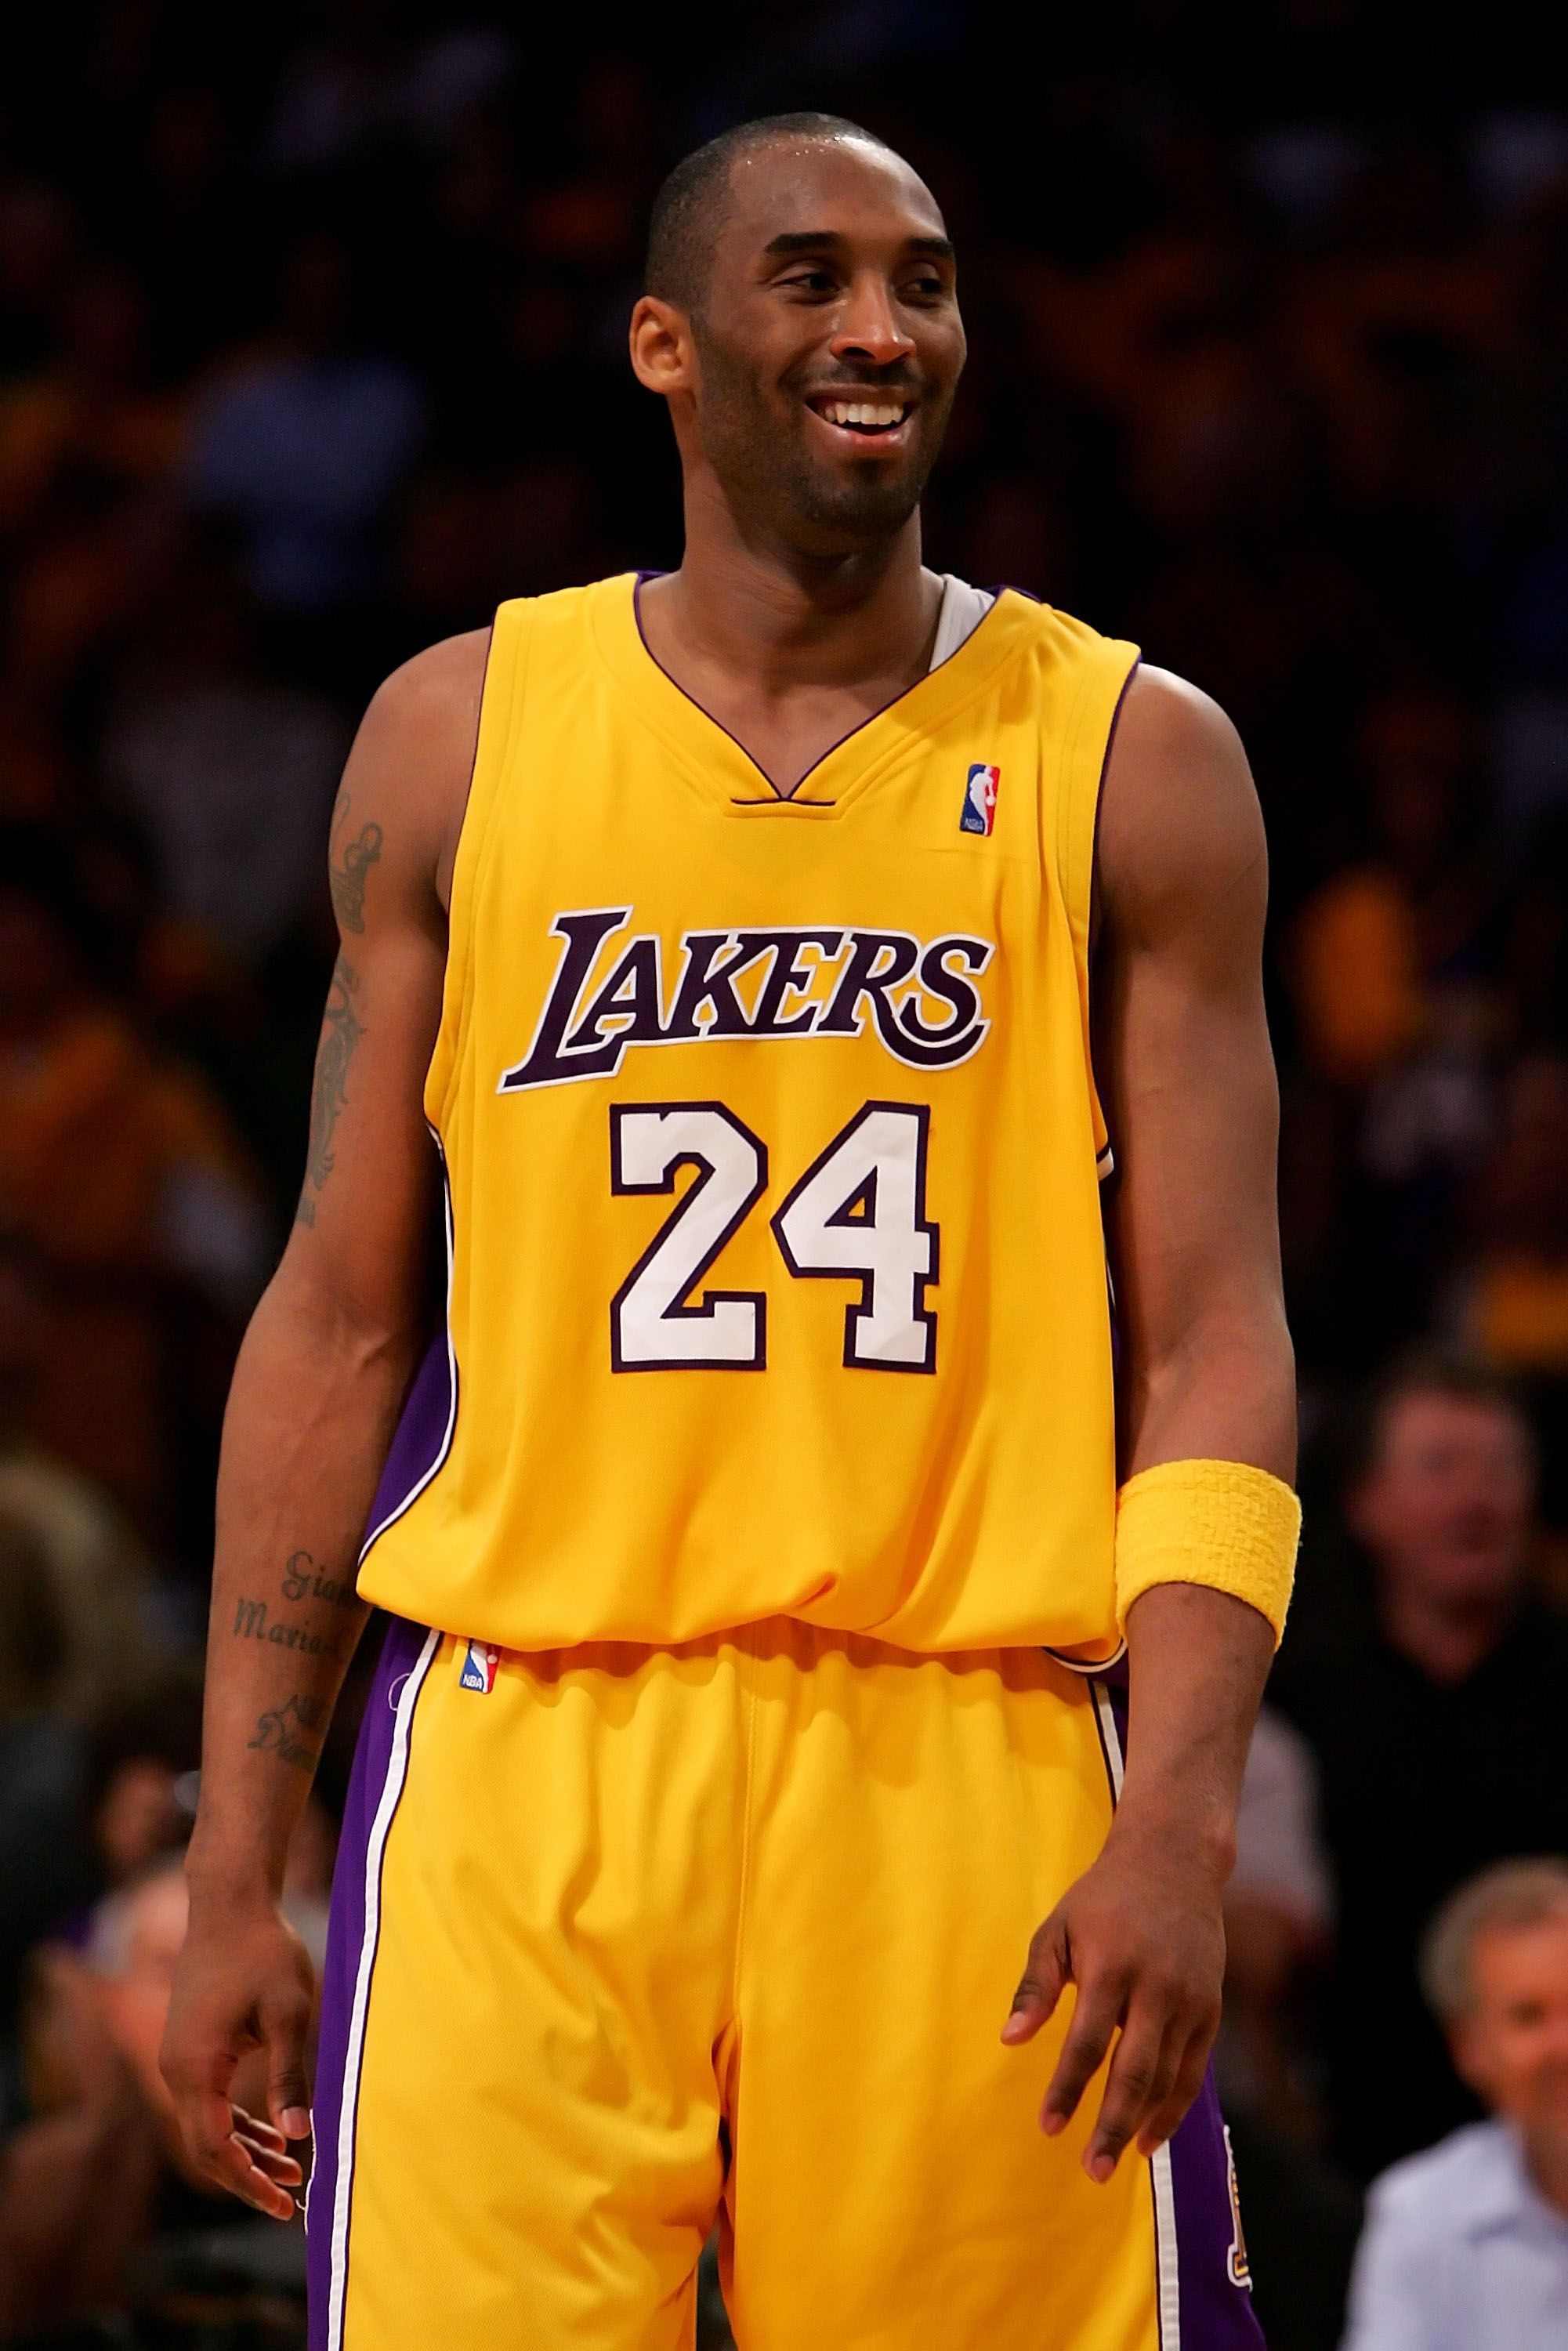 Kobe Bryant of the LA Lakers smiles after the Lakers beat the Phoenix Suns in Los Angeles. | Photo: Getty Images